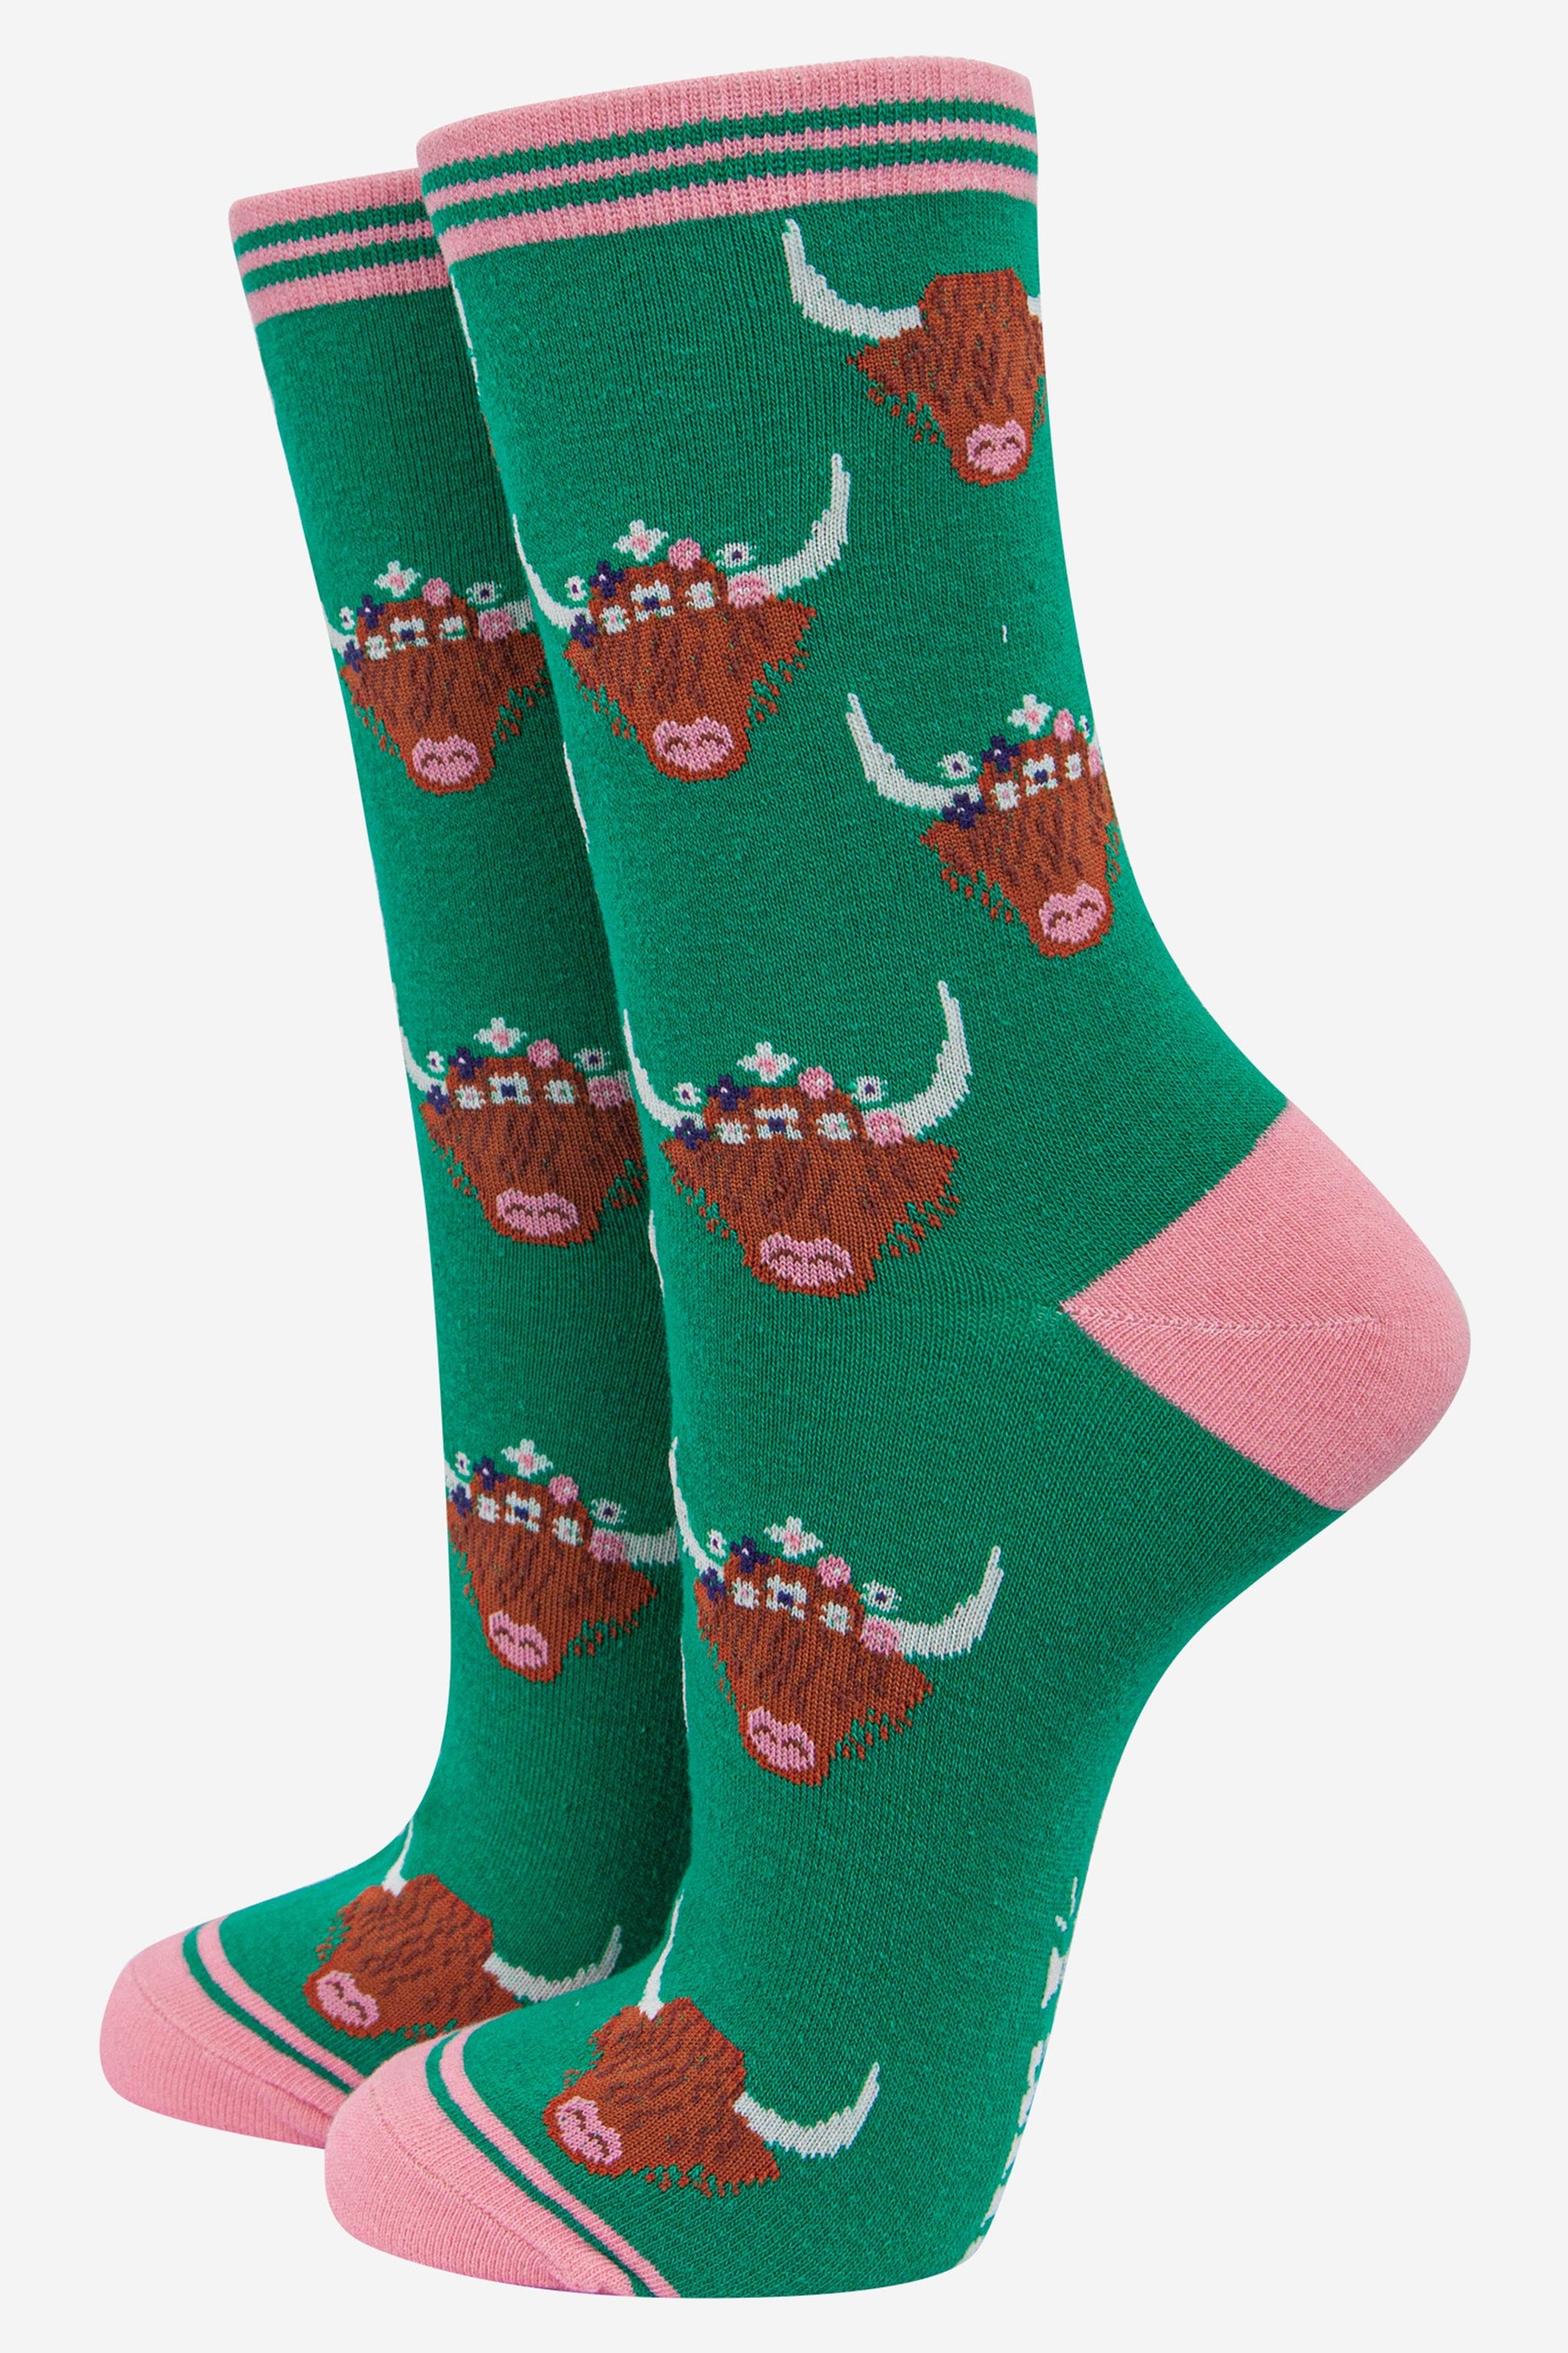 green bamboo socks with pink heel, toe and trim with an all over pattern of brown highland cow faces with horns the cows are wearing floral wreaths as crowns